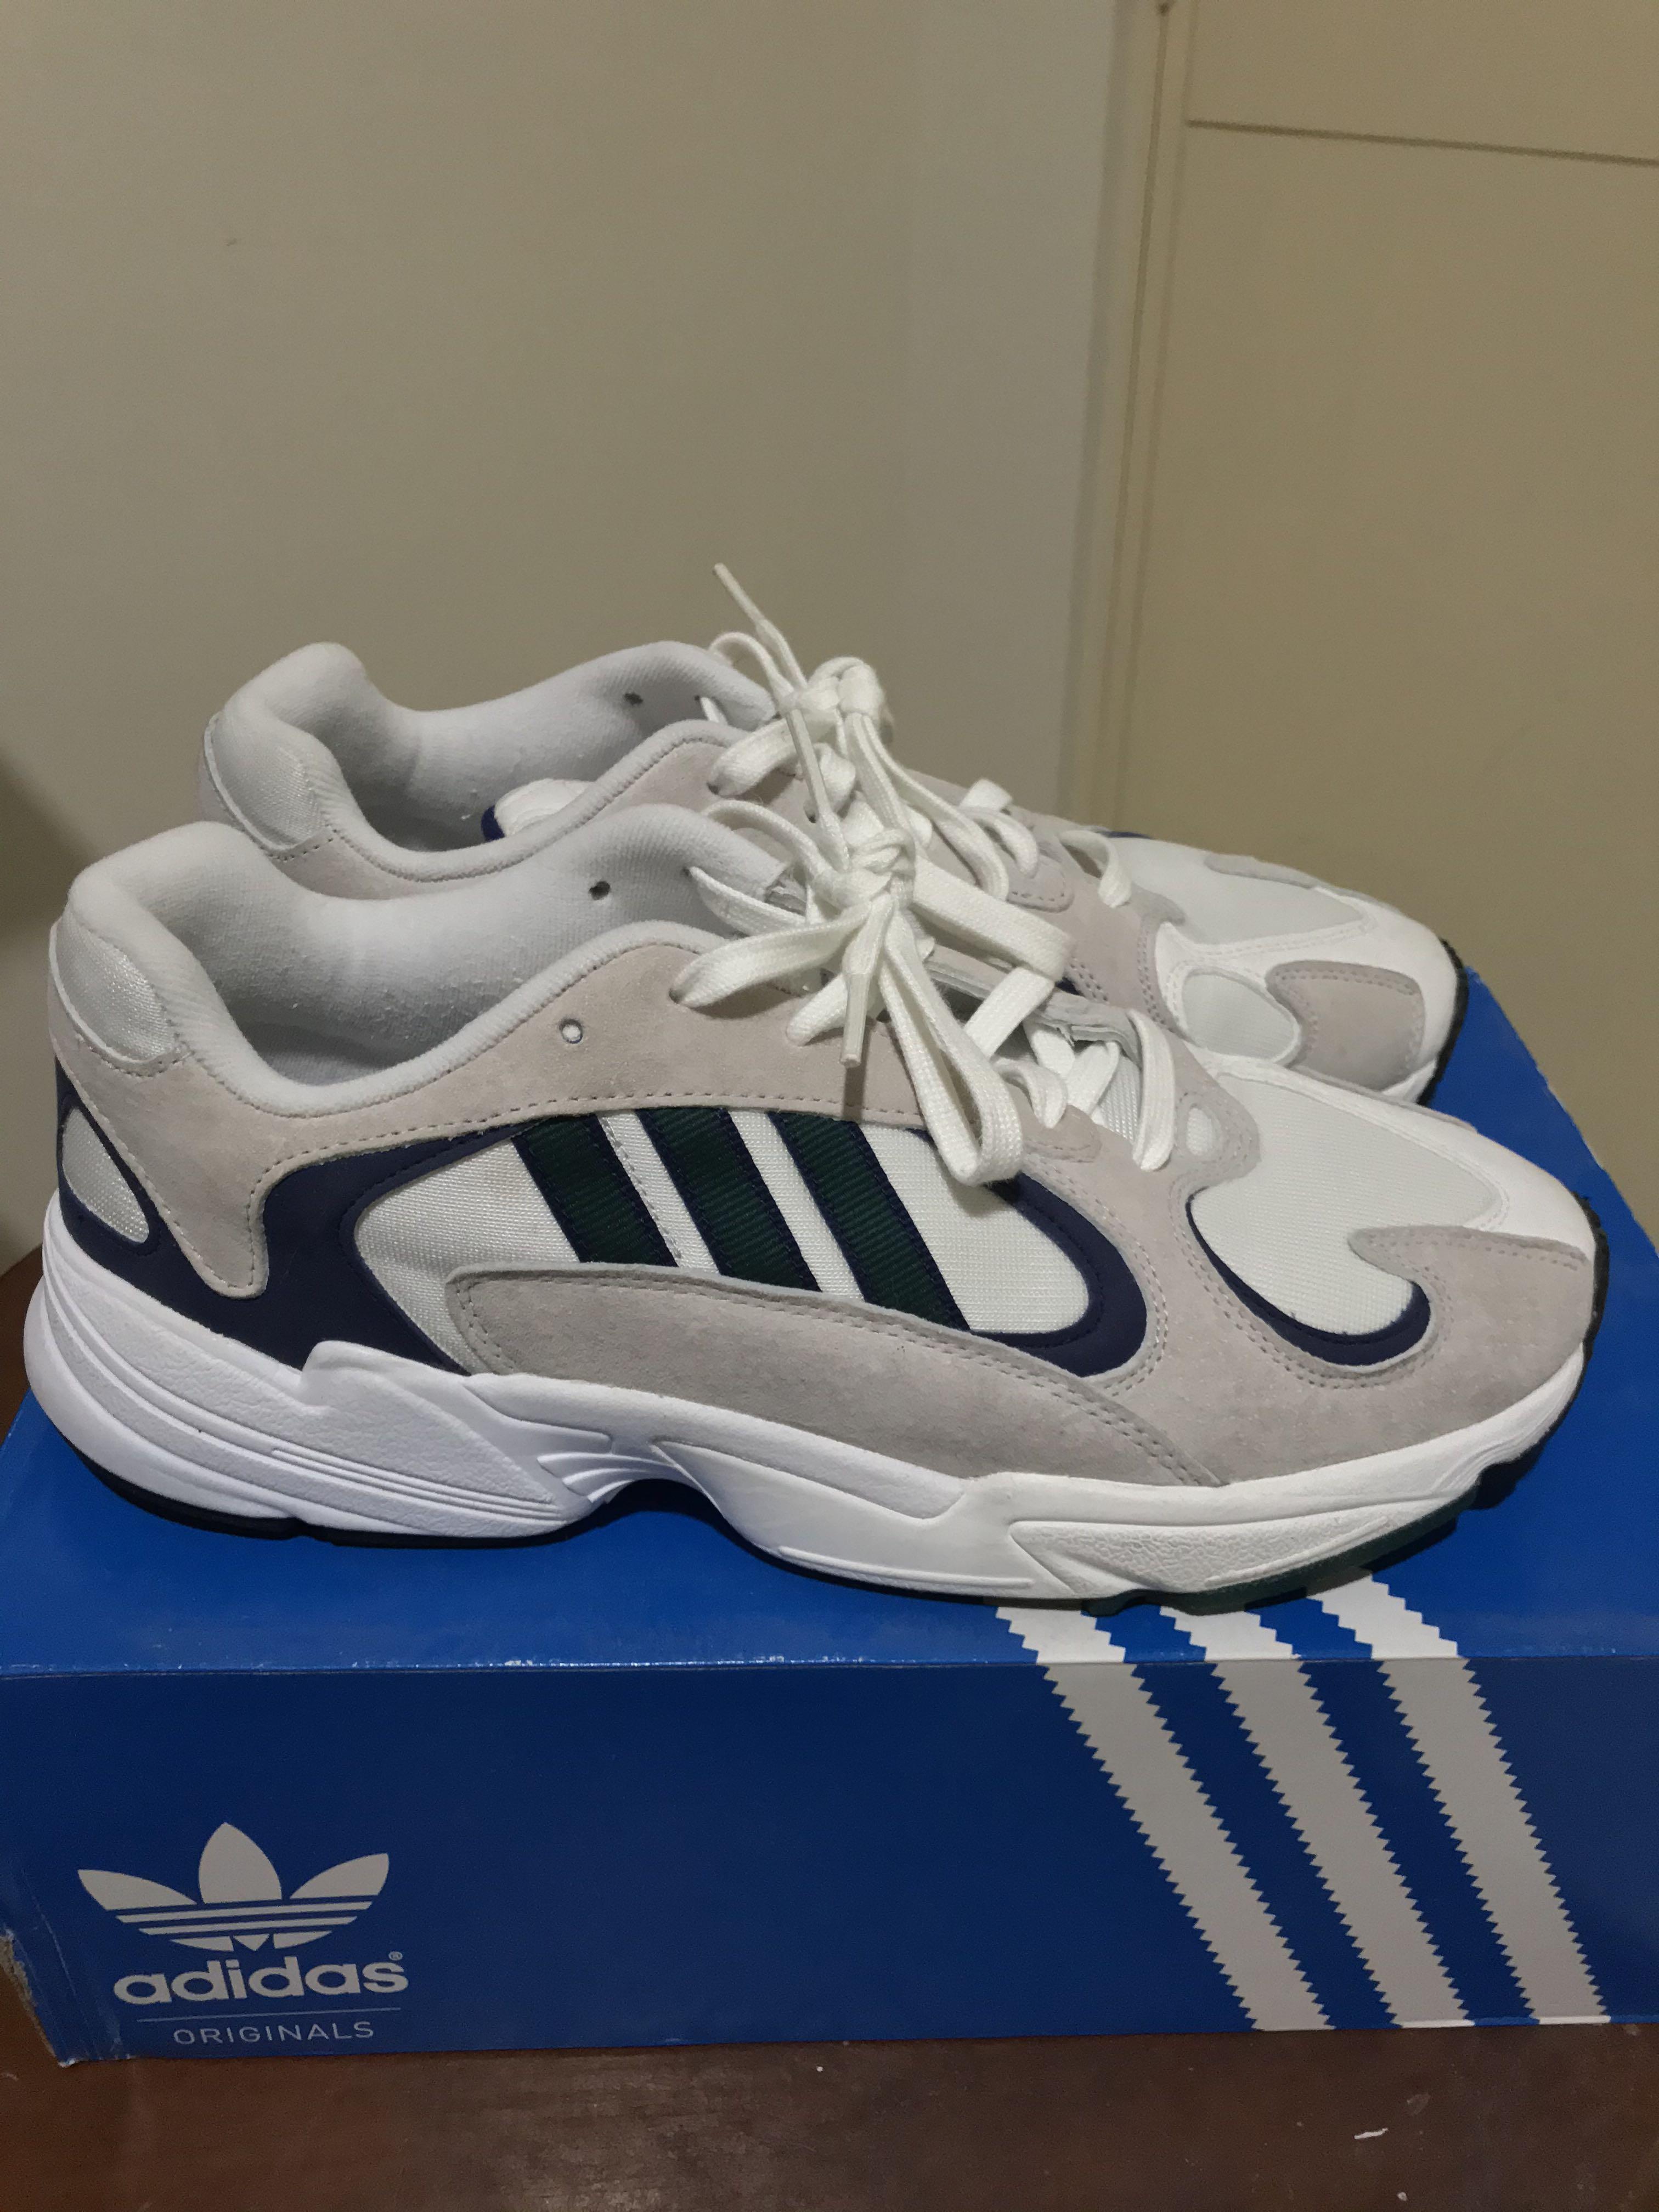 adidas yung 1 og size 8.5 cheap online